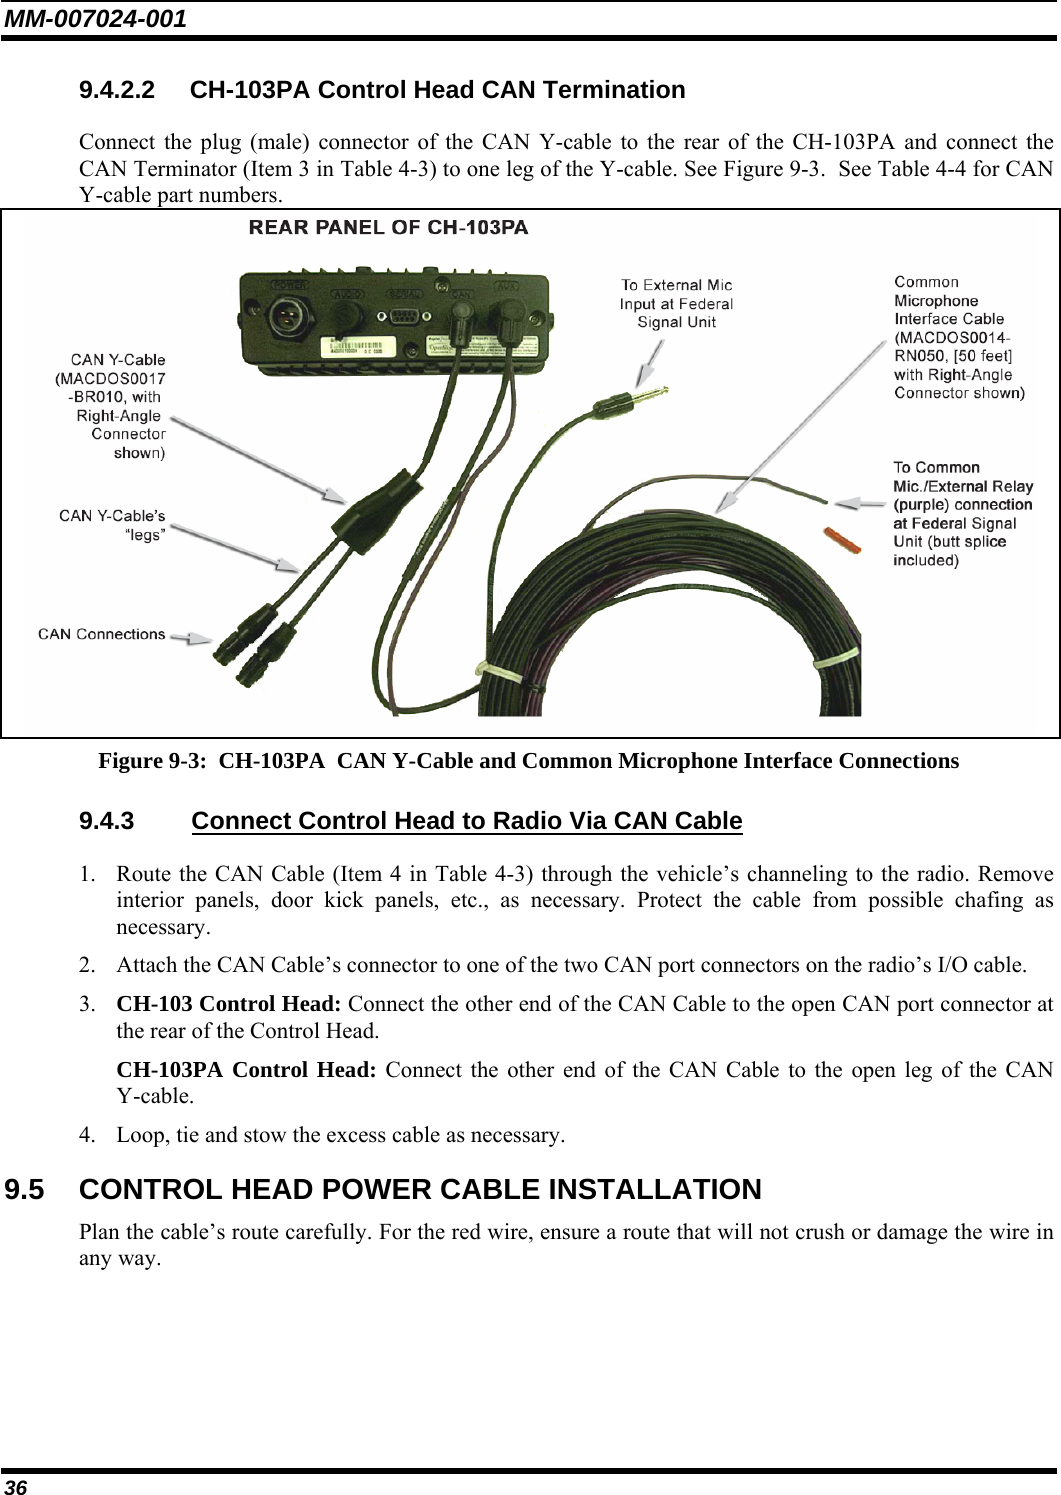 MM-007024-001 36 9.4.2.2 CH-103PA Control Head CAN Termination Connect the plug (male) connector of the CAN Y-cable to the rear of the CH-103PA and connect the CAN Terminator (Item 3 in Table 4-3) to one leg of the Y-cable. See Figure 9-3.  See Table 4-4 for CAN Y-cable part numbers.  Figure 9-3:  CH-103PA  CAN Y-Cable and Common Microphone Interface Connections 9.4.3  Connect Control Head to Radio Via CAN Cable 1. Route the CAN Cable (Item 4 in Table 4-3) through the vehicle’s channeling to the radio. Remove interior panels, door kick panels, etc., as necessary. Protect the cable from possible chafing as necessary. 2. Attach the CAN Cable’s connector to one of the two CAN port connectors on the radio’s I/O cable. 3. CH-103 Control Head: Connect the other end of the CAN Cable to the open CAN port connector at the rear of the Control Head. CH-103PA Control Head: Connect the other end of the CAN Cable to the open leg of the CAN Y-cable. 4. Loop, tie and stow the excess cable as necessary. 9.5  CONTROL HEAD POWER CABLE INSTALLATION Plan the cable’s route carefully. For the red wire, ensure a route that will not crush or damage the wire in any way. 